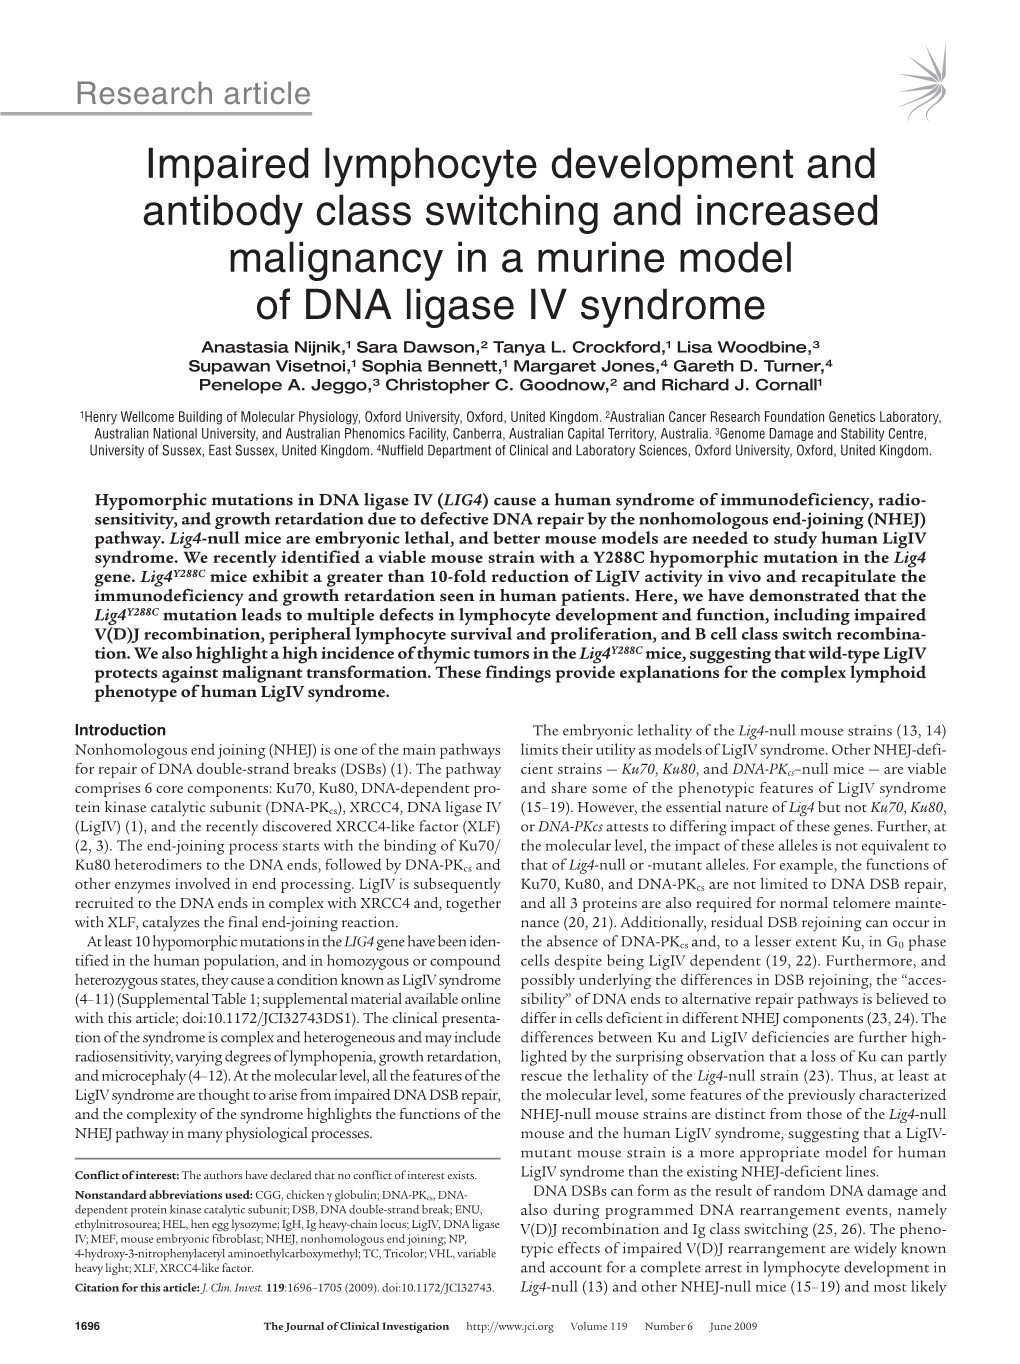 Impaired Lymphocyte Development and Antibody Class Switching And